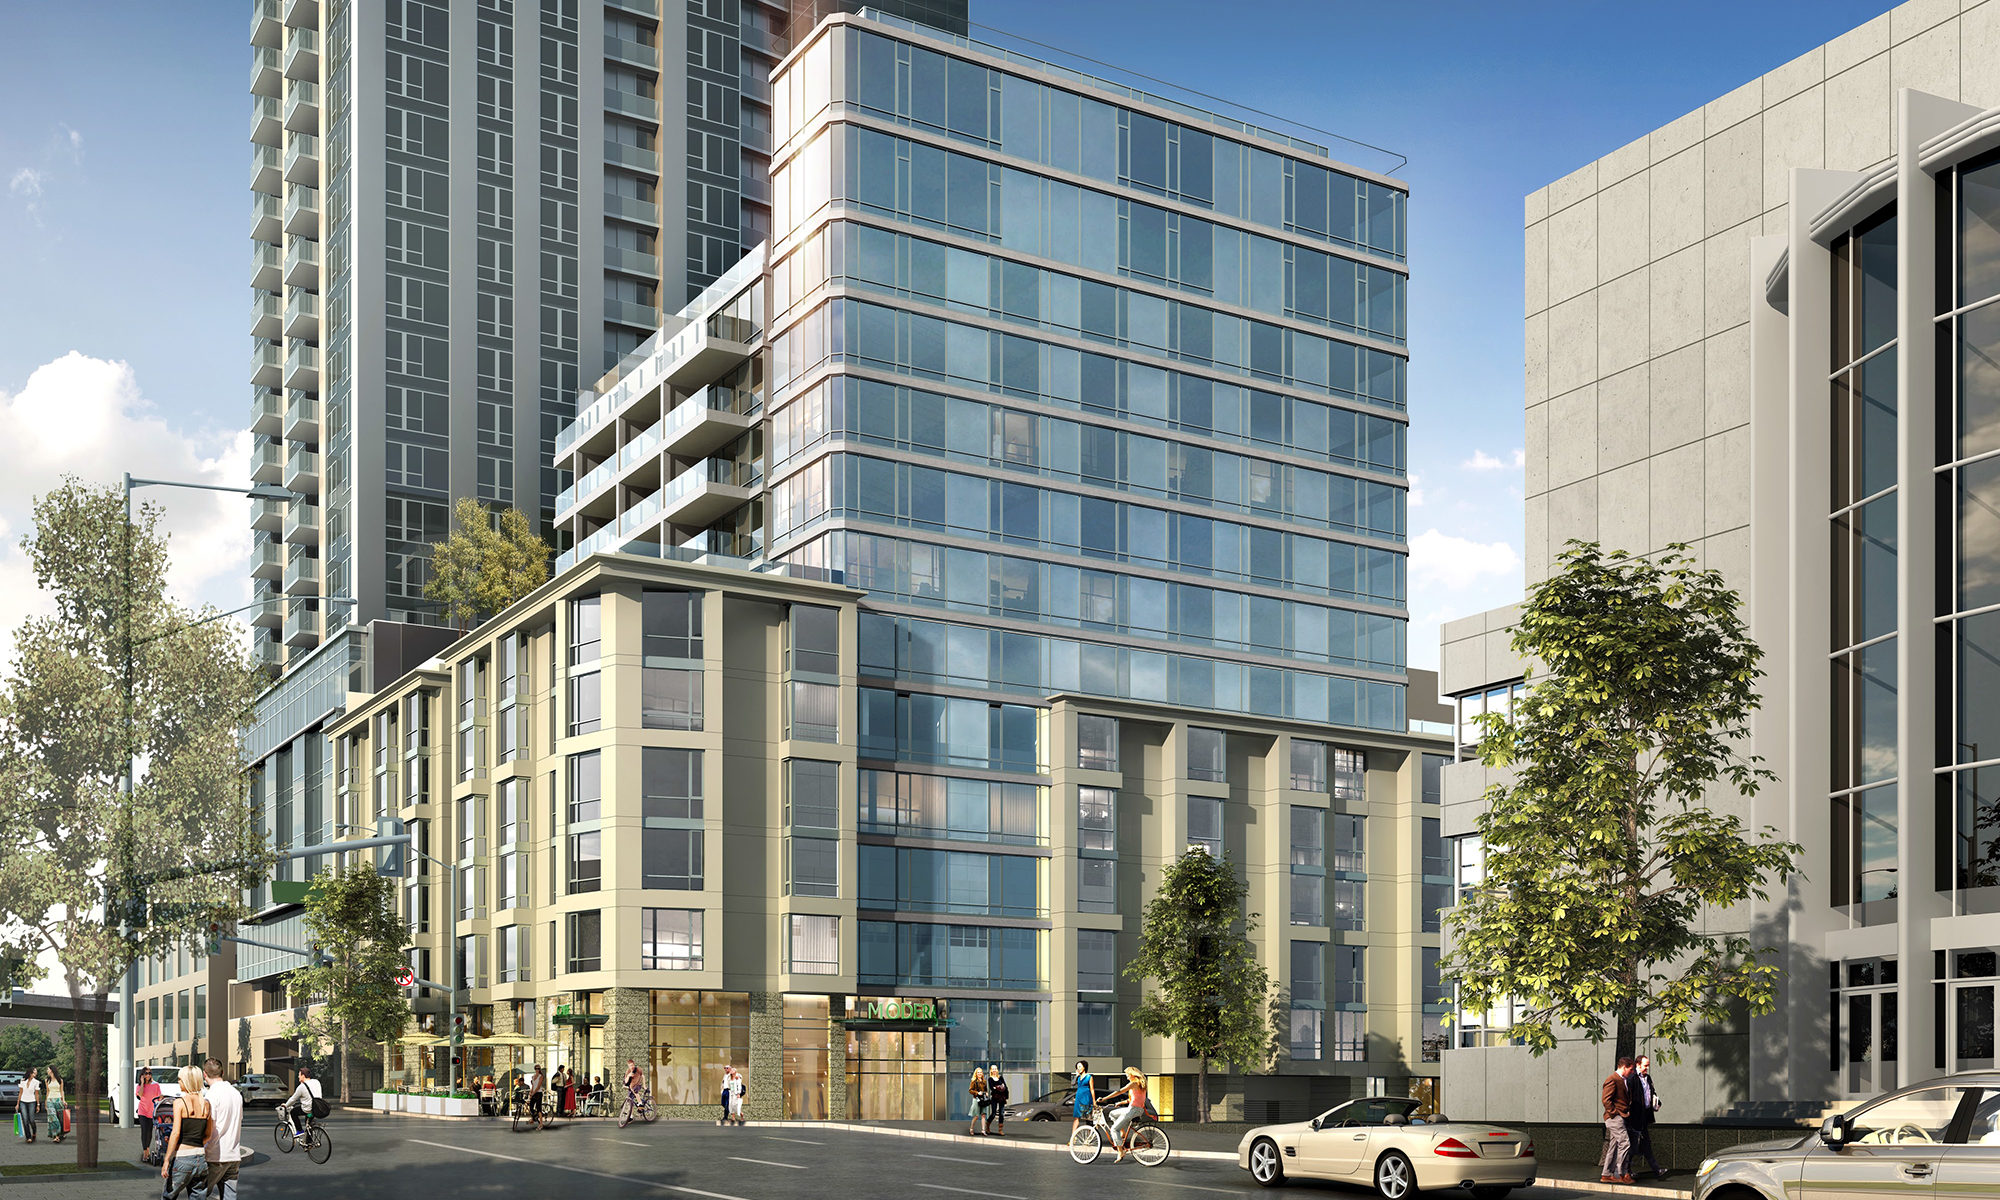 Rendering of high rise from street view showing residential units, retail, and walkways.